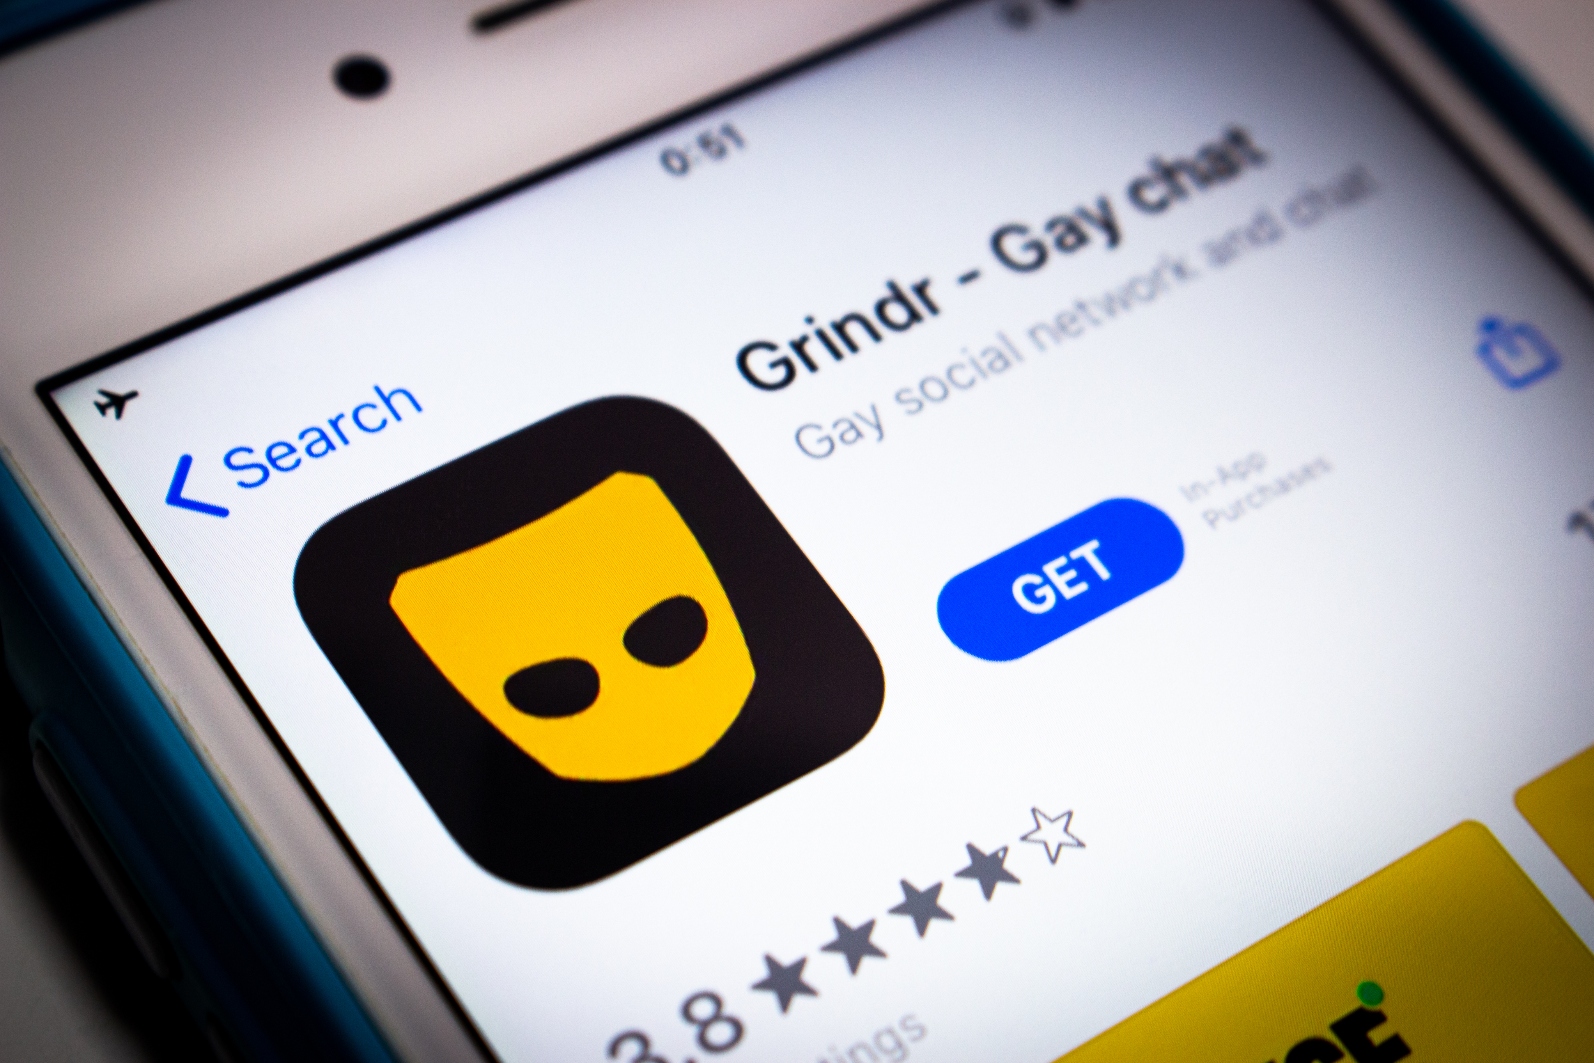 Police investigate chilling Grindr attacks in Canberra